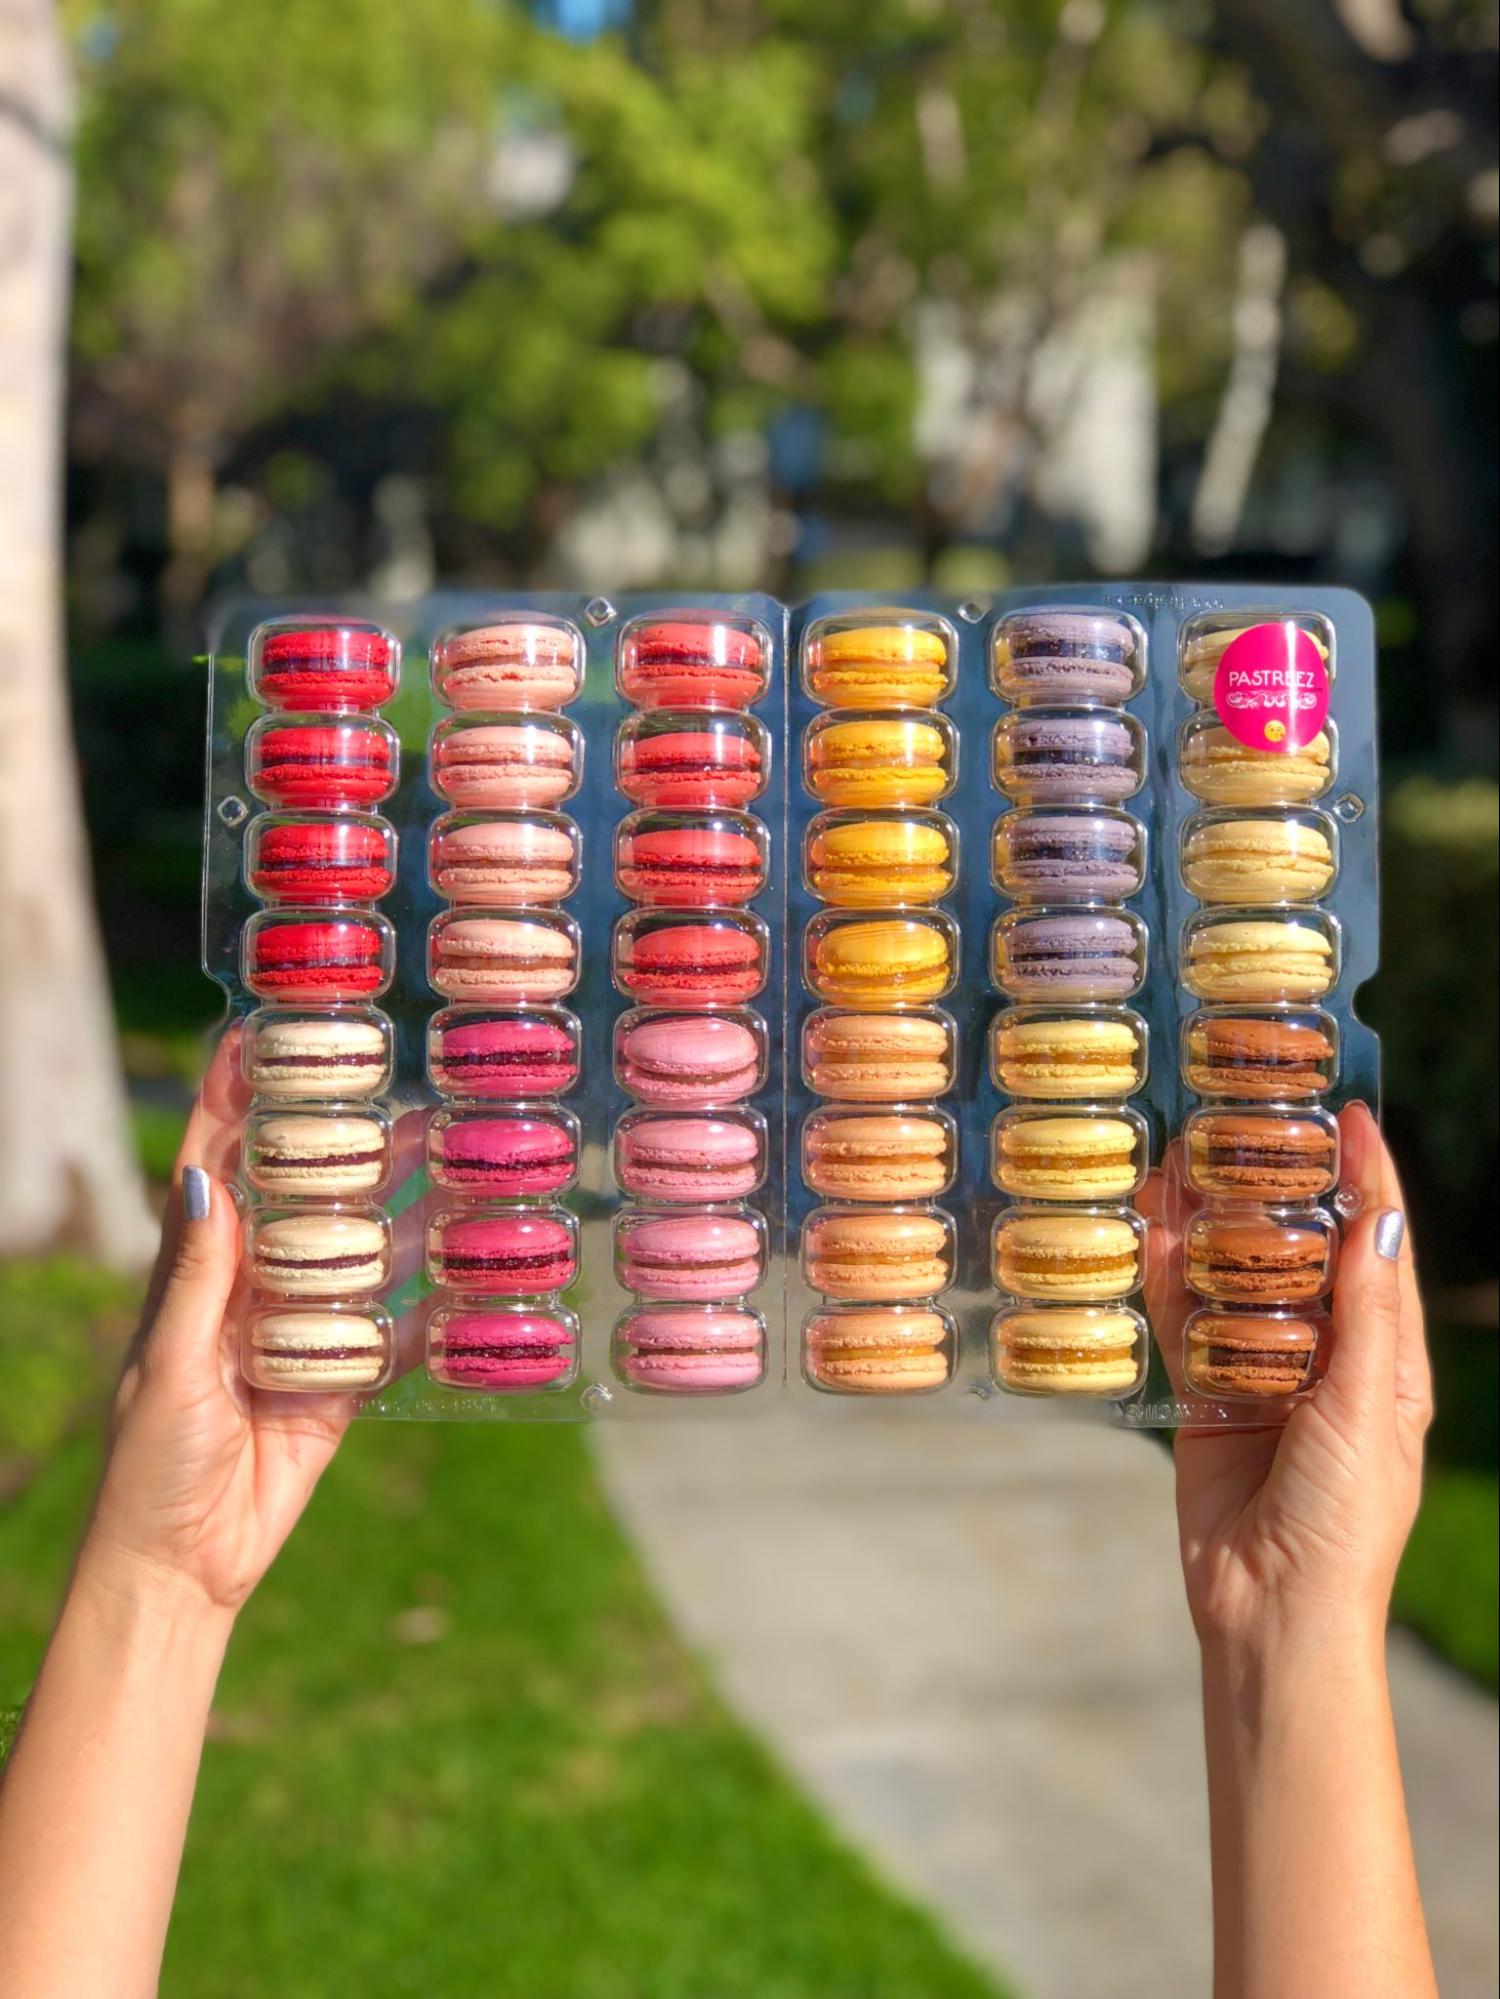 A box of 48 macaroons made by Pastreez.